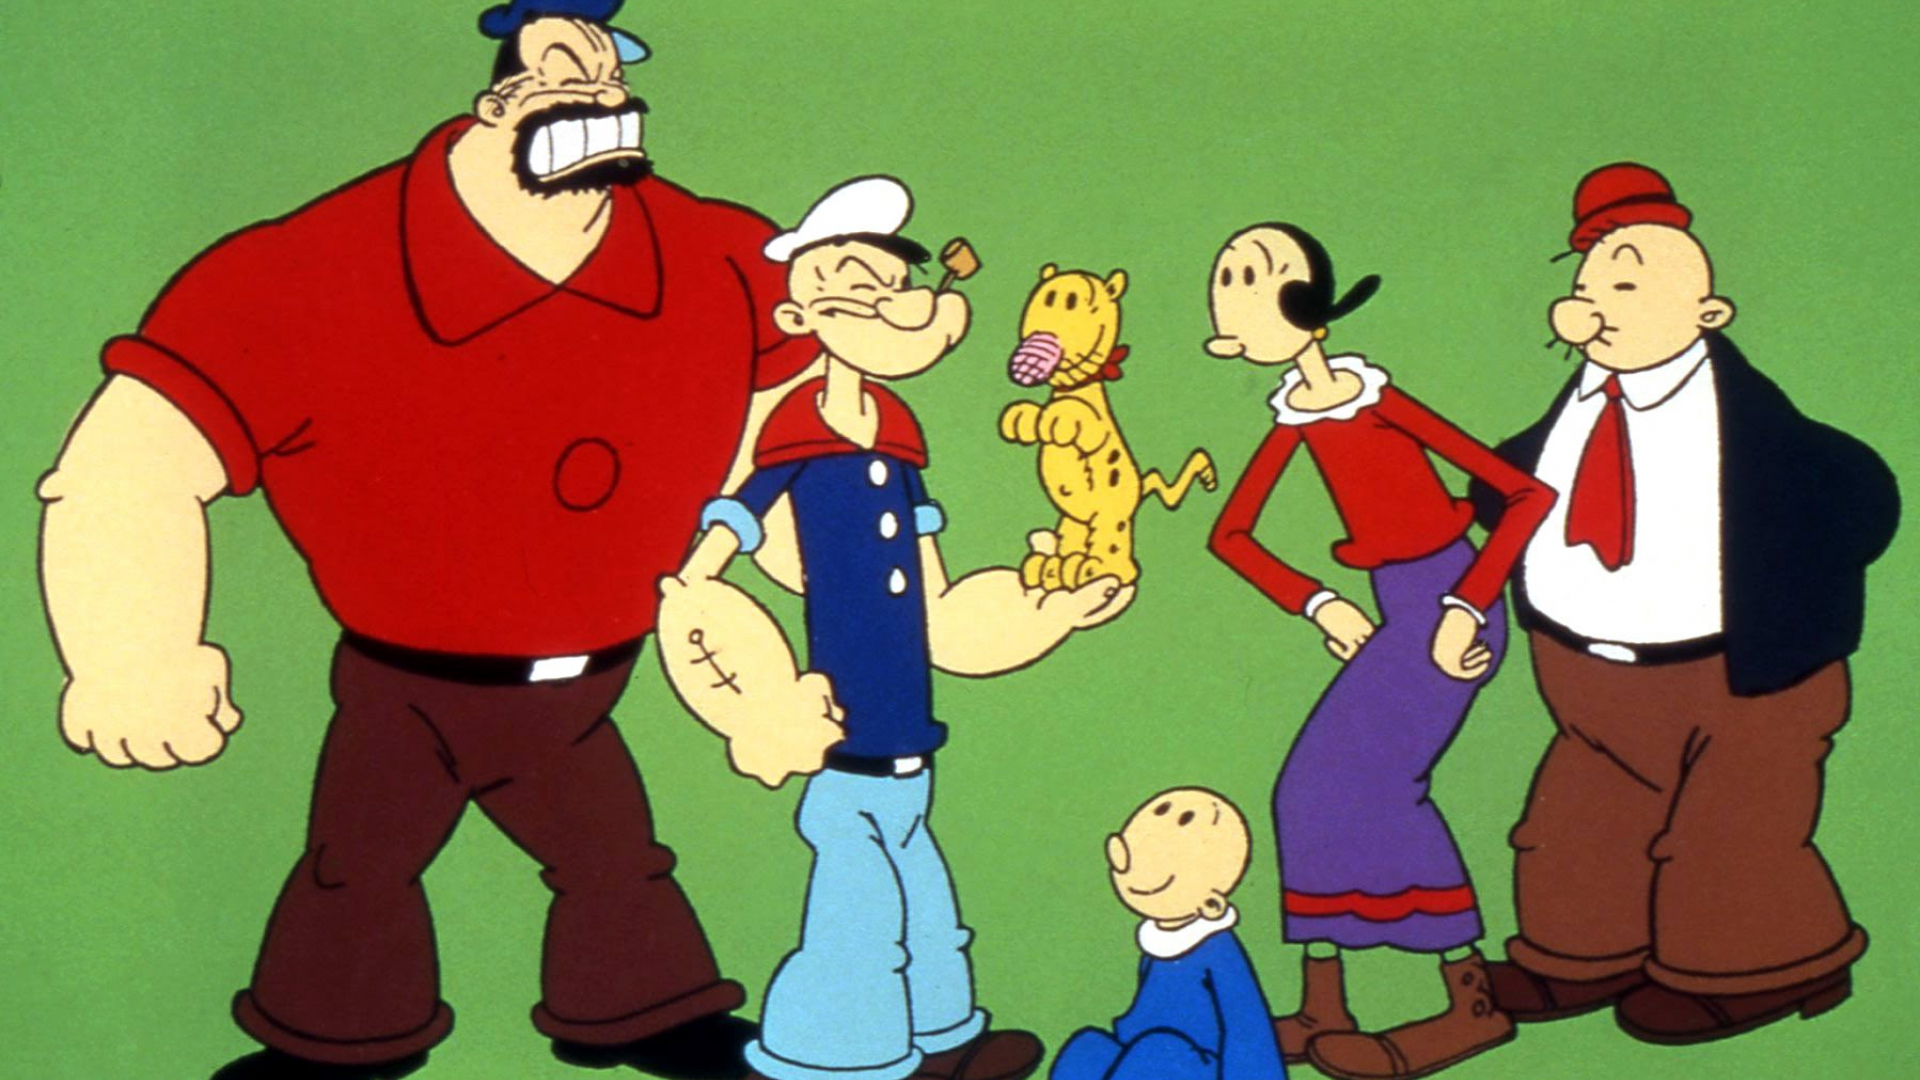 Popeye The Sailor Man Live-Action Film In Development